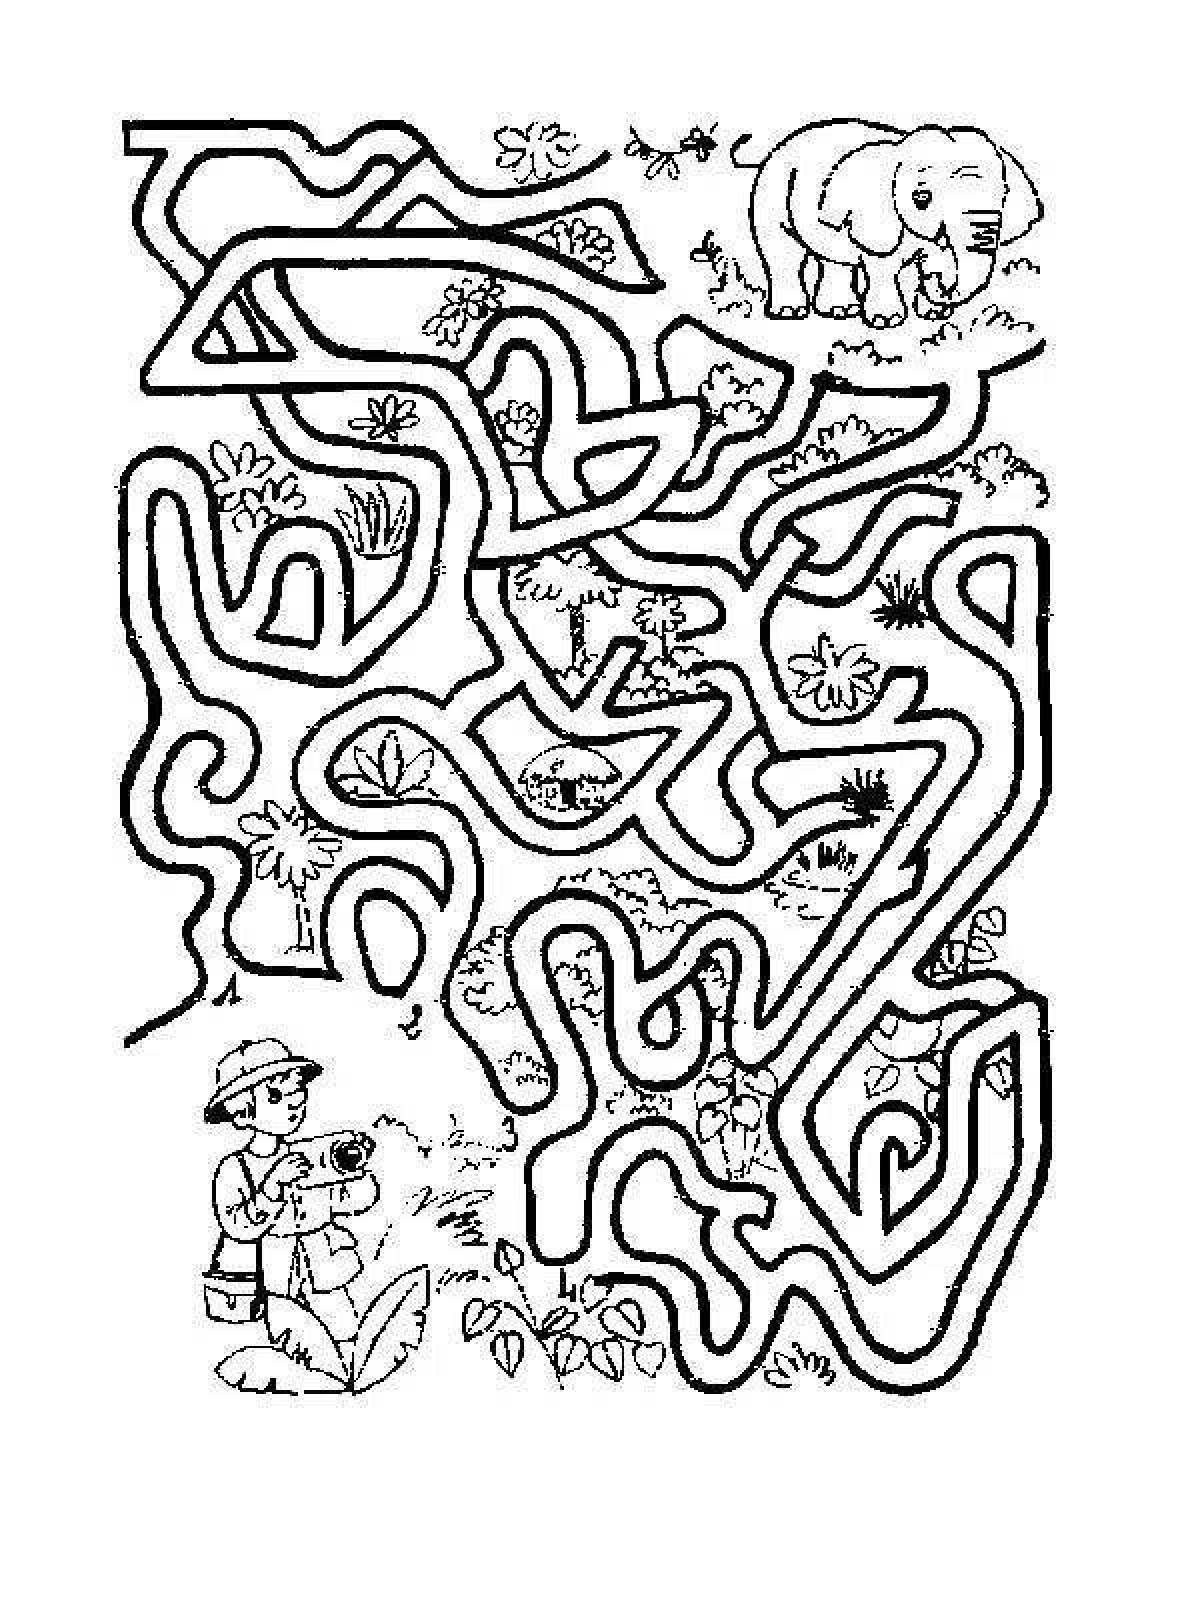 Mazes for children 7 8 years old #2